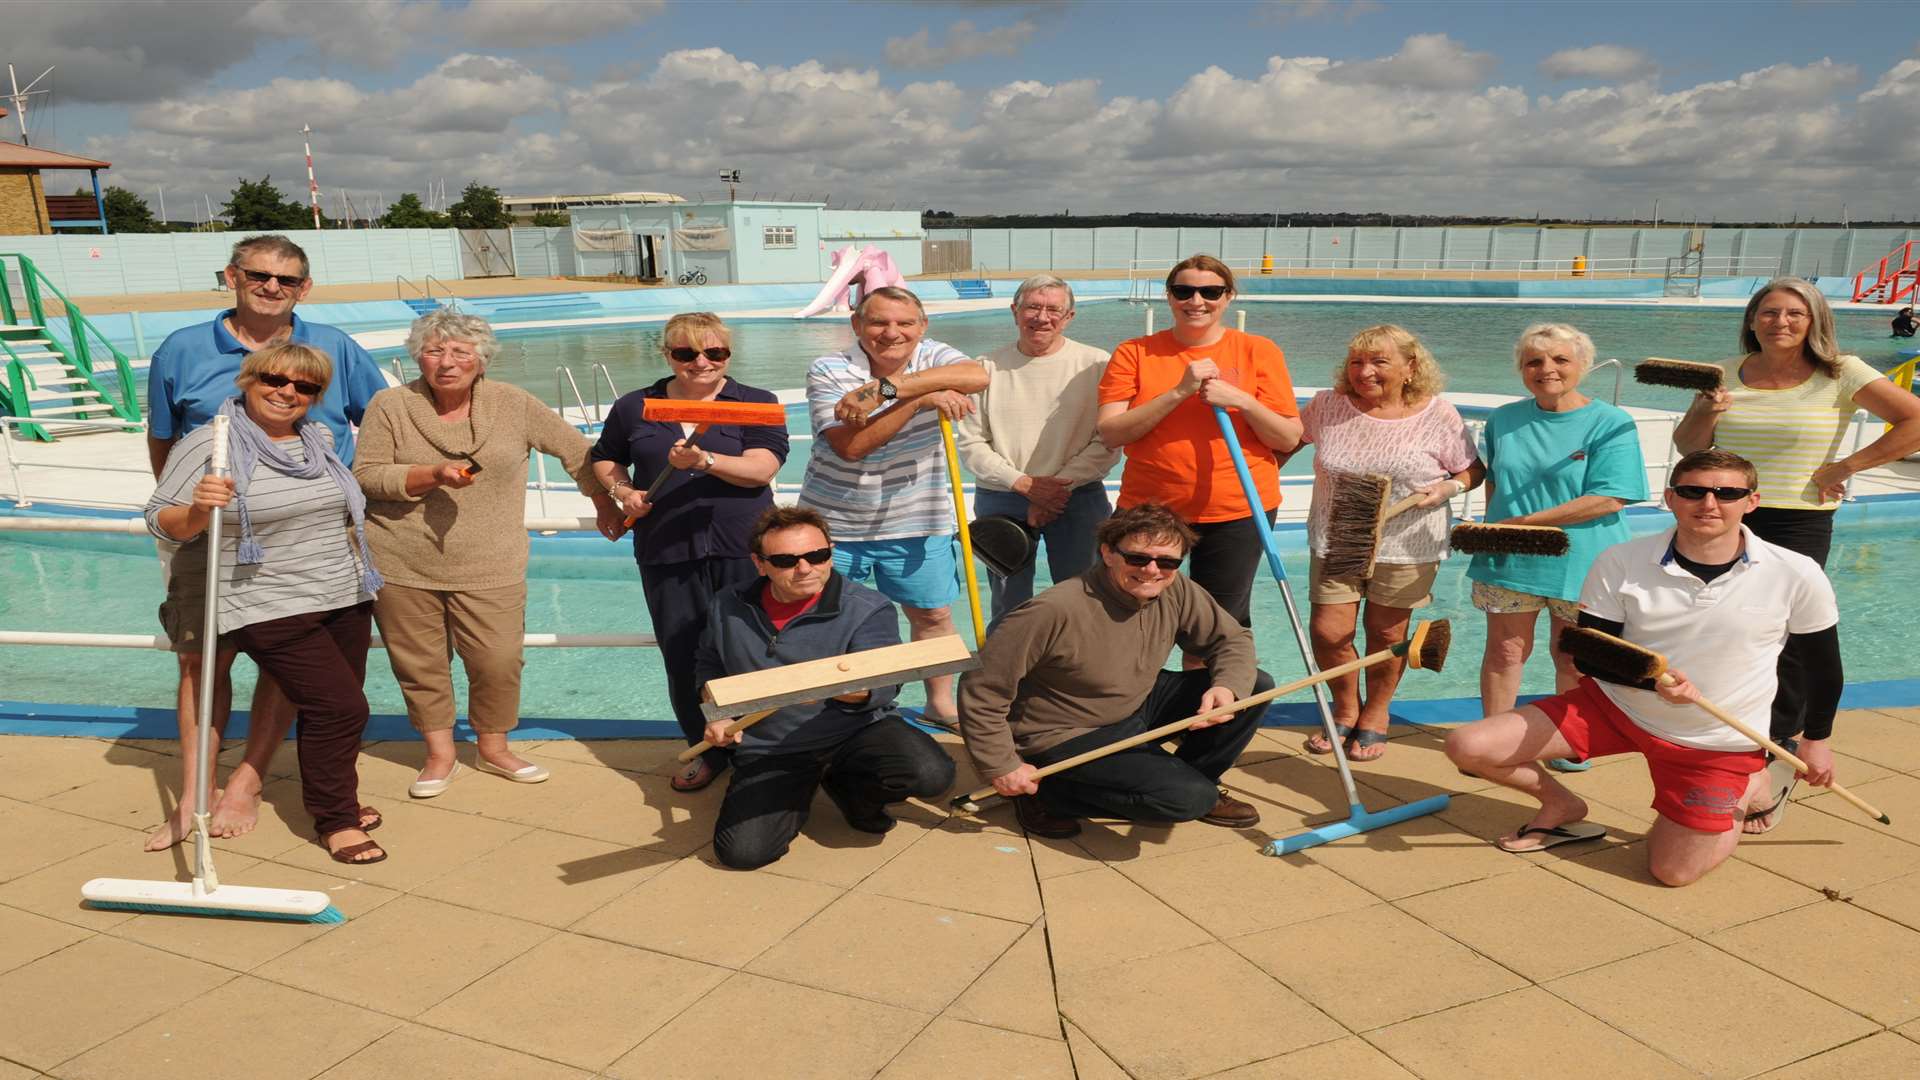 Friends of the Strand Pool at the lido in Gillingham